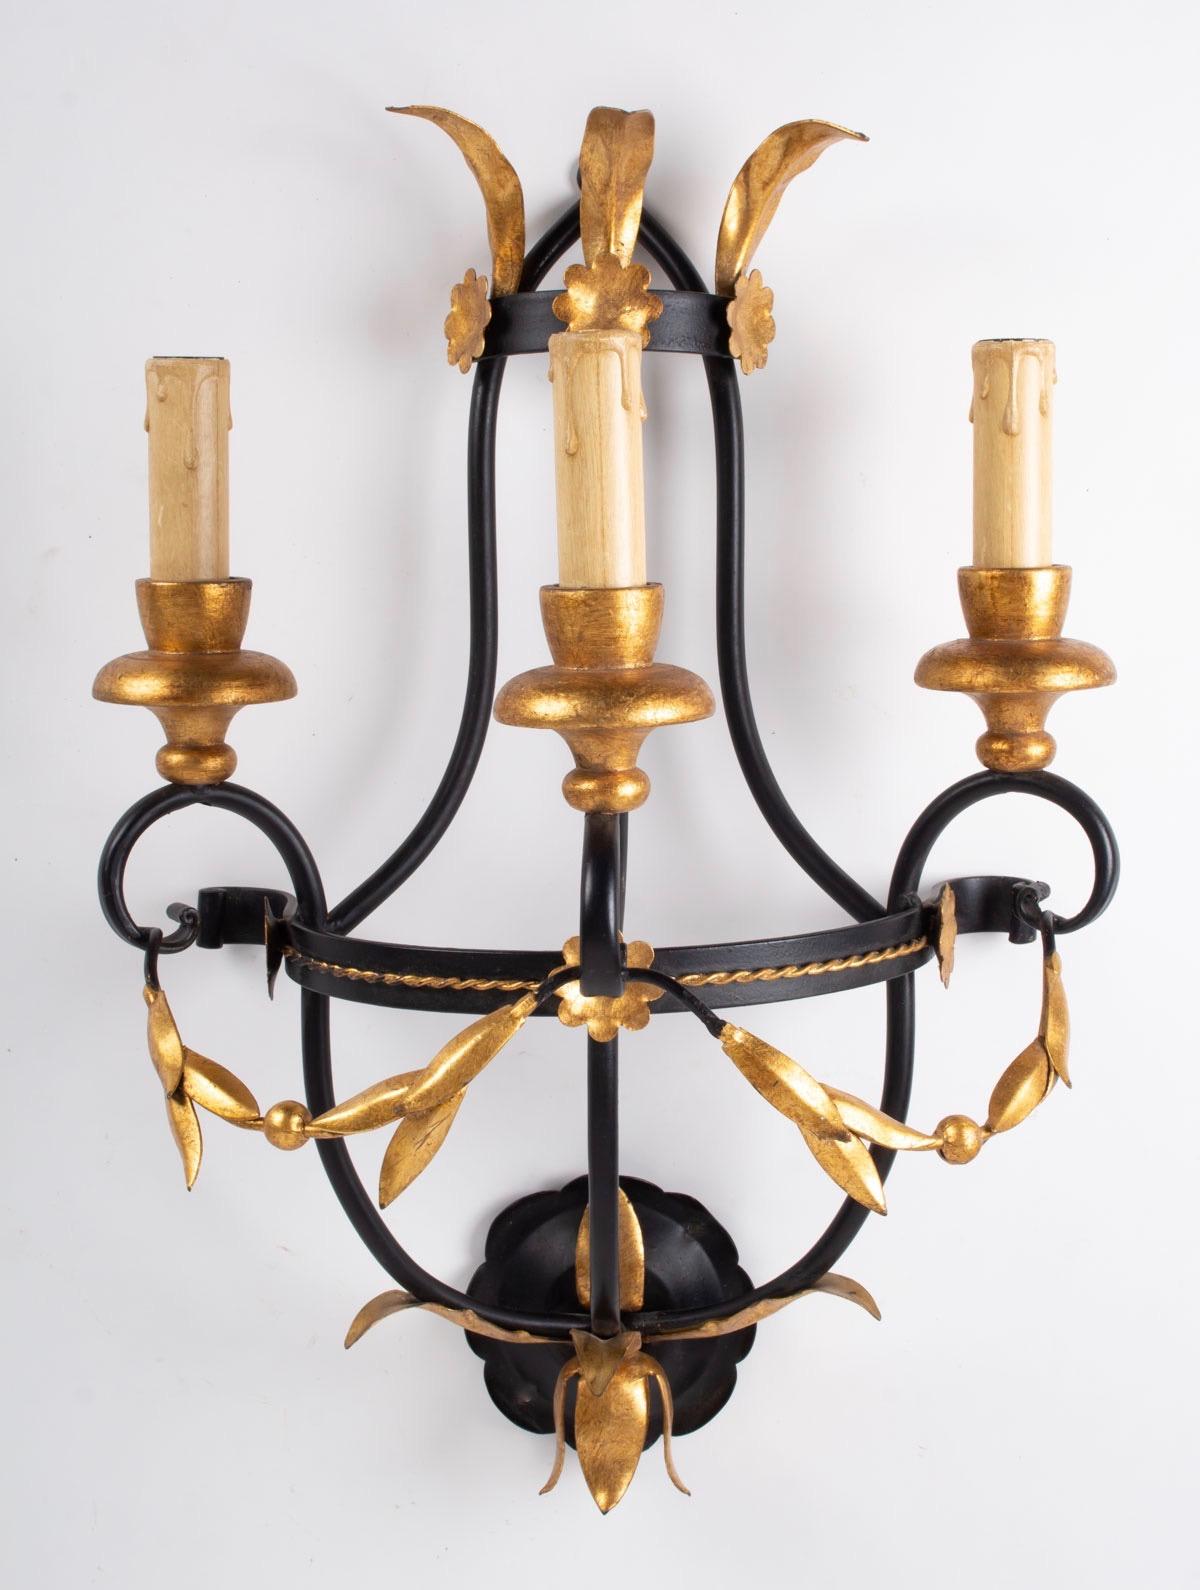 1960s set of 3 Maison Honore neoclassical sconces
Composed of a black wrought iron structure in the shape of a semicircle positioned in the center of the wall lamp on which is placed 3 black wrought iron rods forming ascending and descending